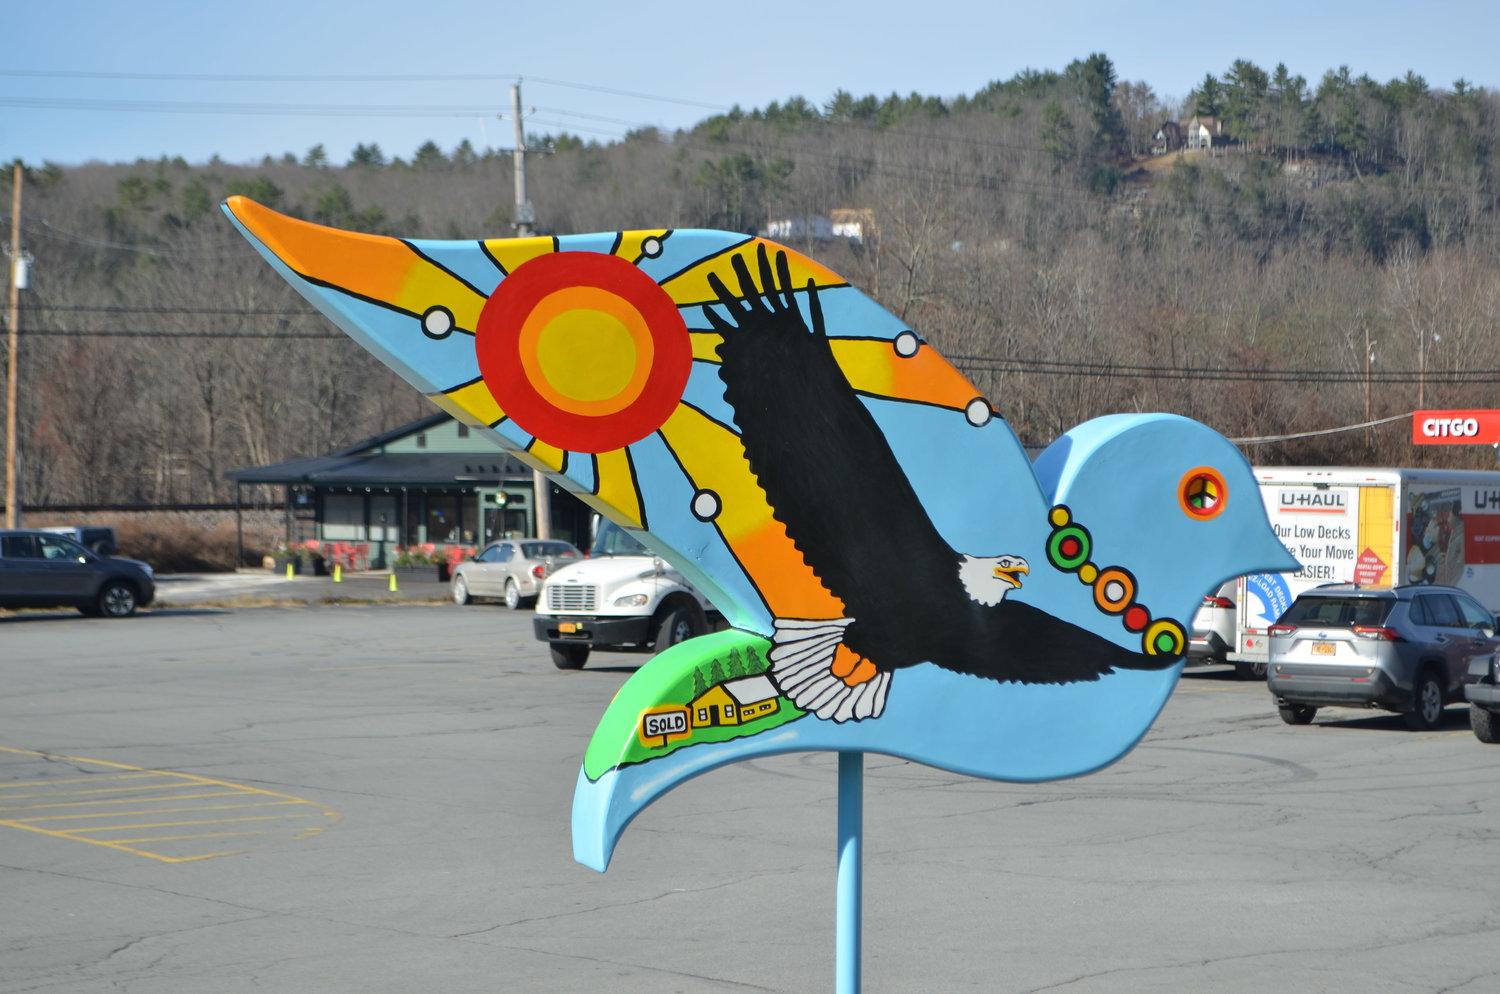 The 61st dove on the Sullivan Catskills Dove Trail features an eagle in honor of Eagle Valley Realty.